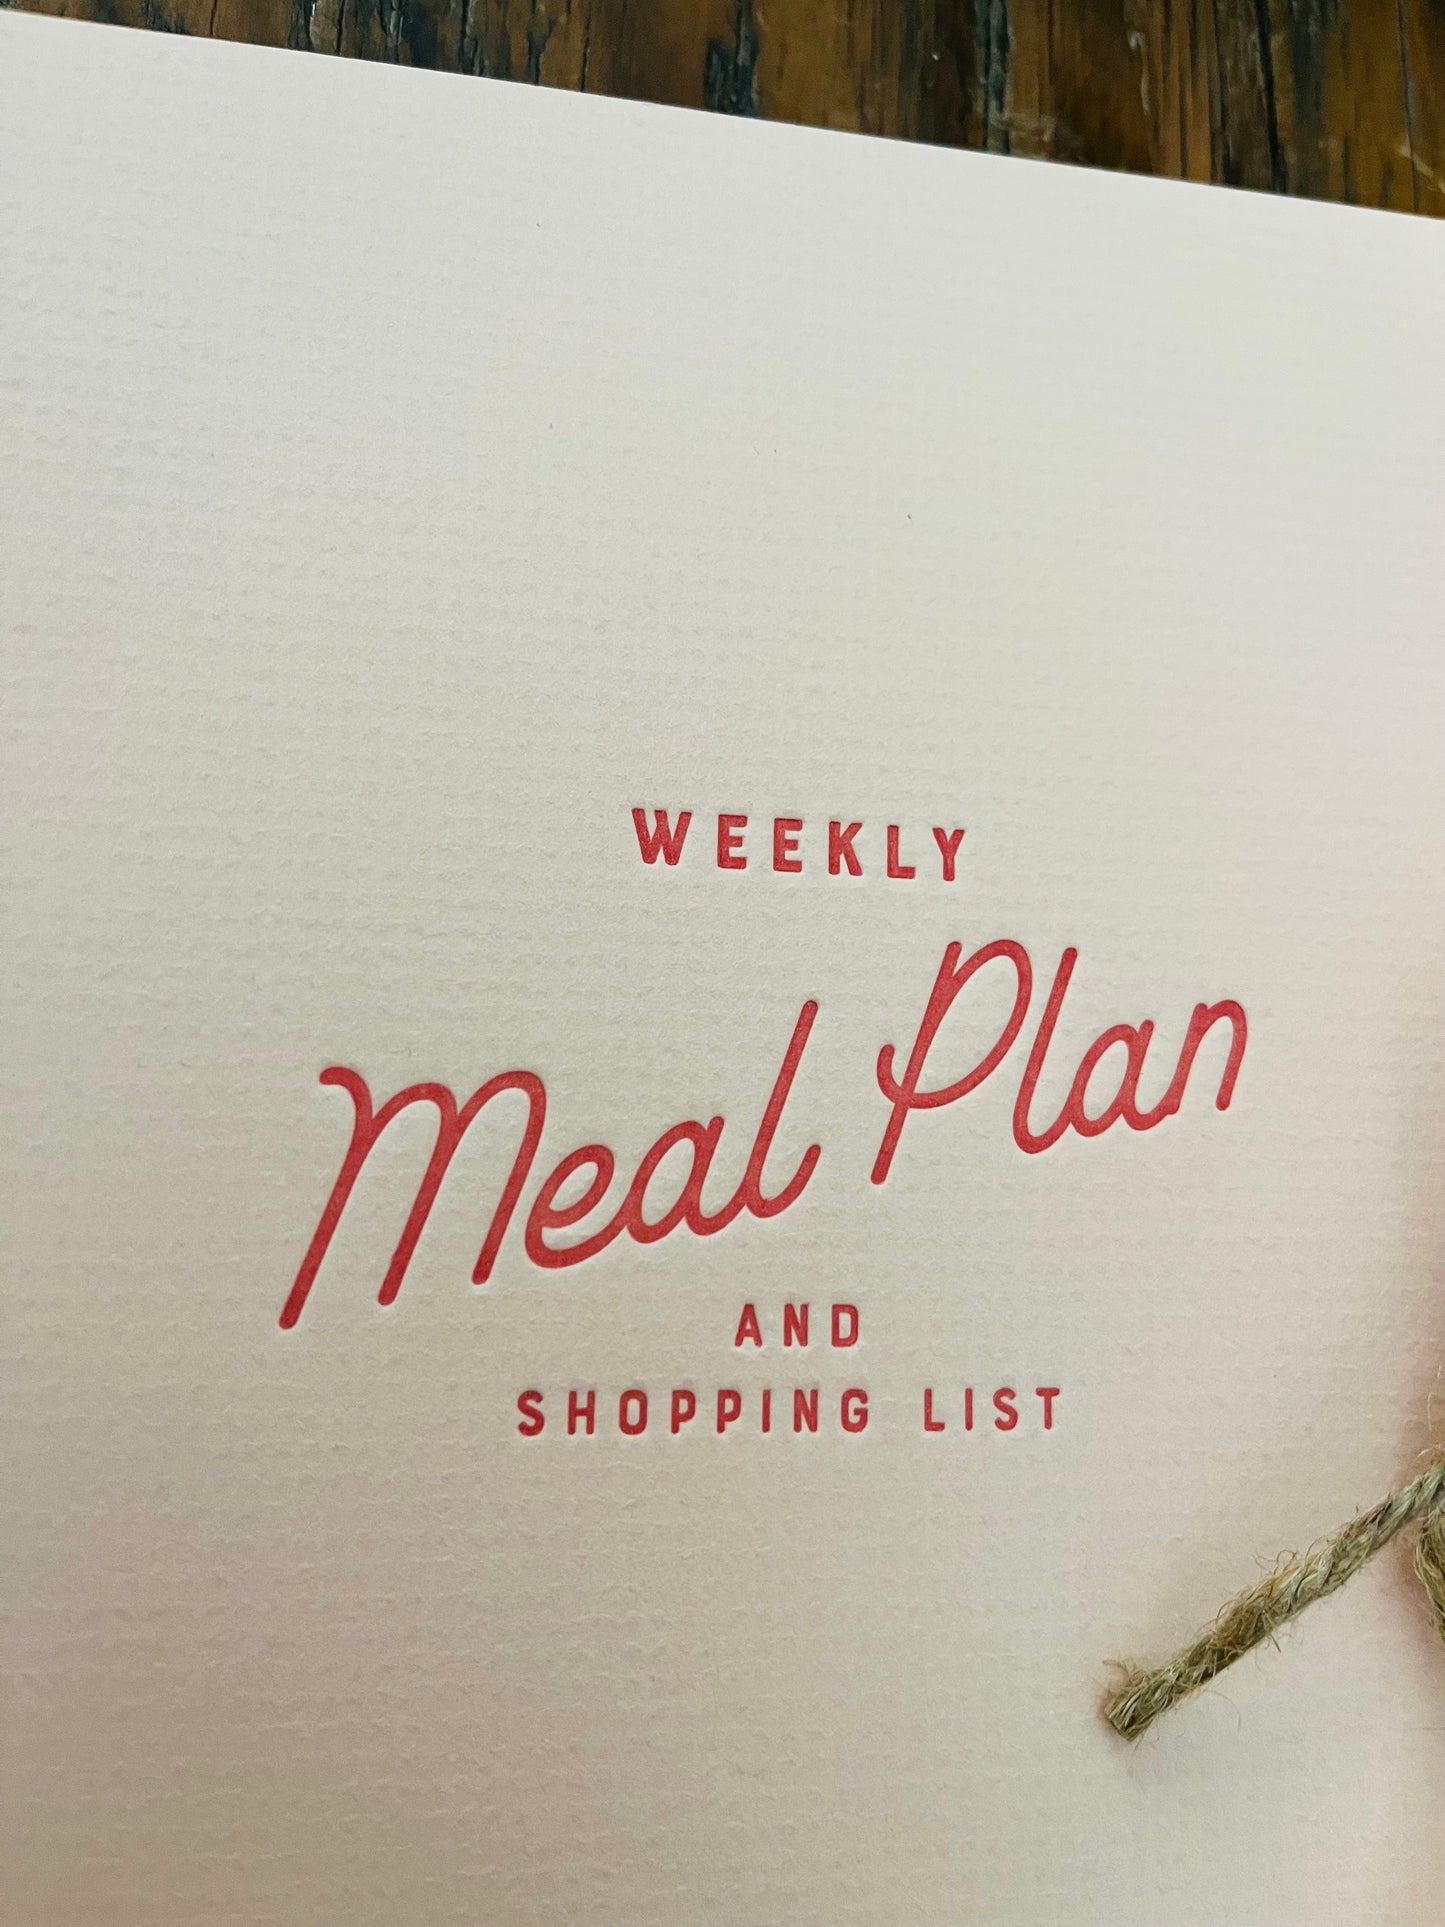 Retro Weekly Meal Planner Stationary Set